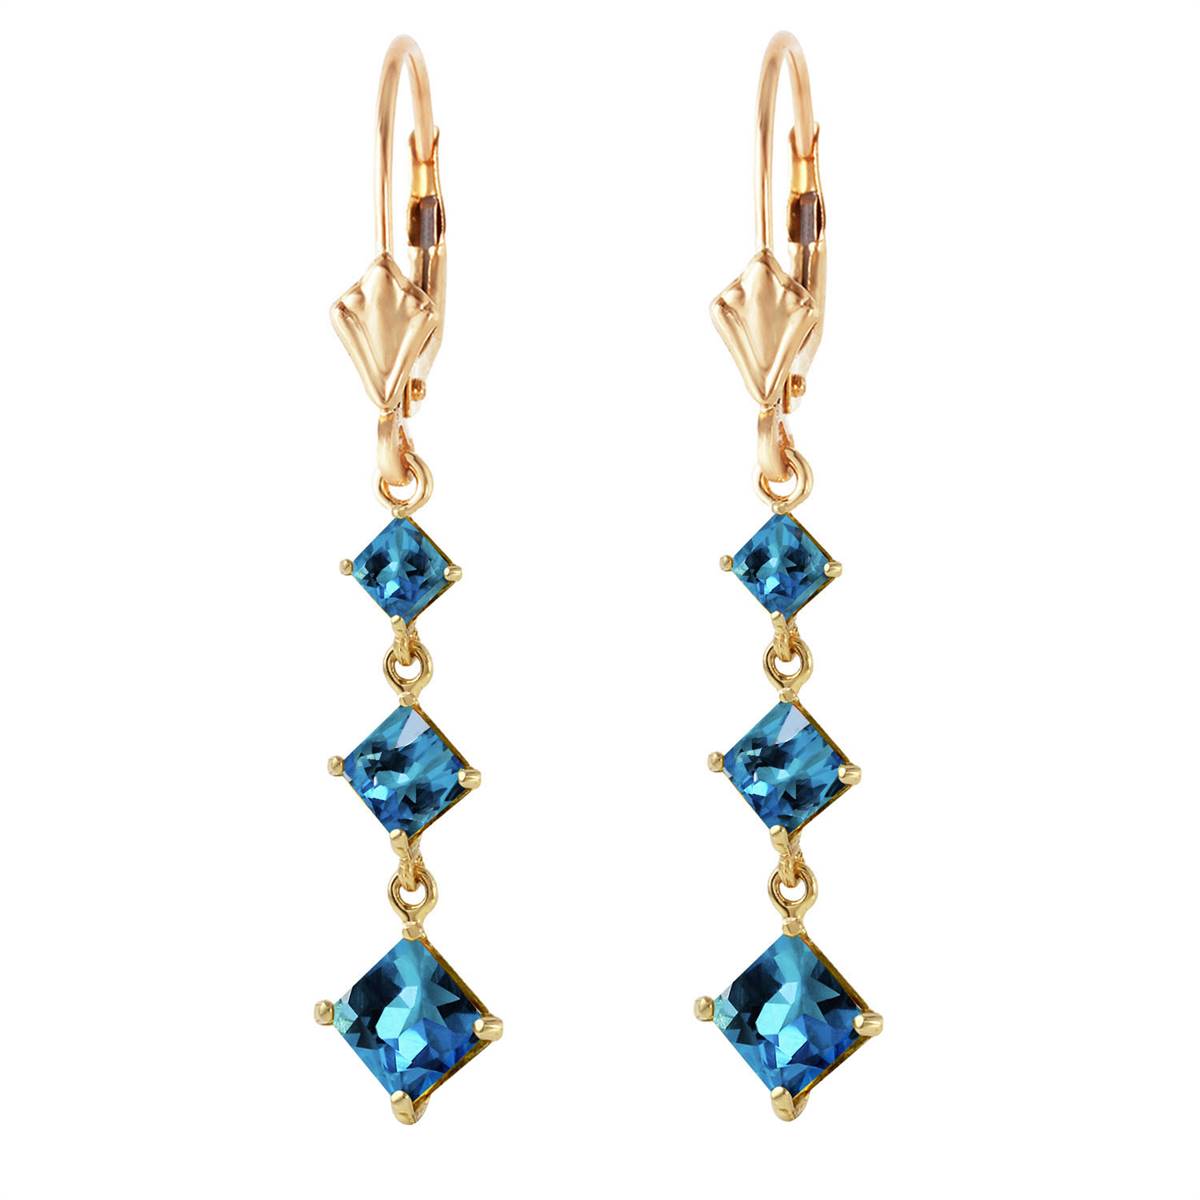 4.79 Carat 14K Solid Yellow Gold Giving Blue Topaz Earrings